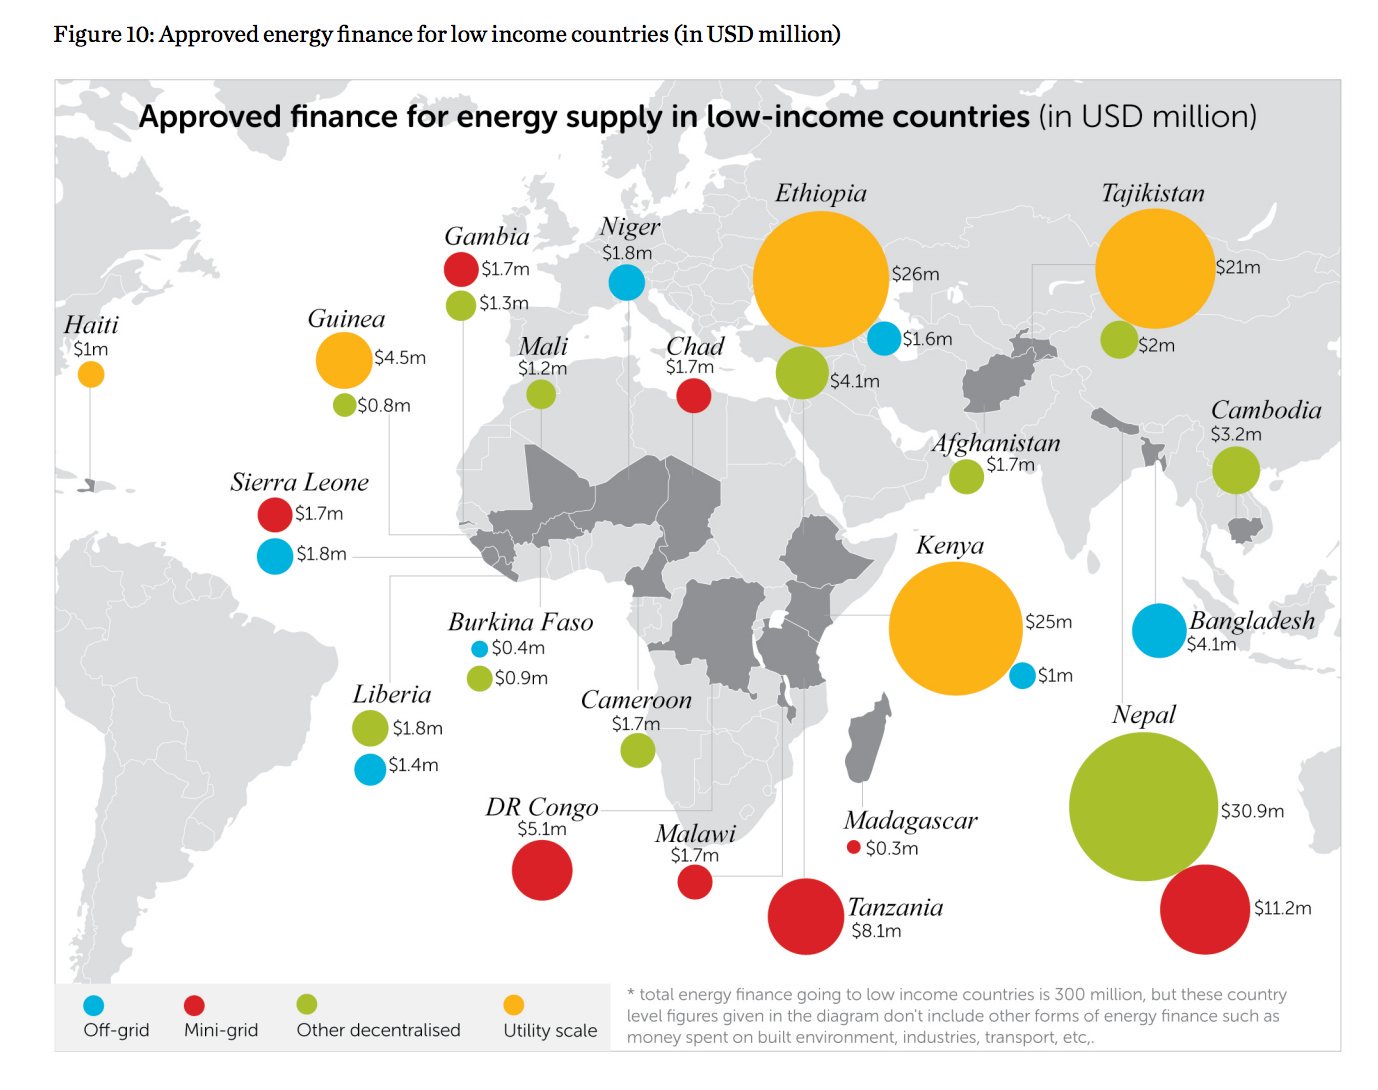 Unable to show this map at the event, but it shows approved energy finance for low income countries (in USD million) #COP22 @hivosorg https://t.co/oxbfJPKstg